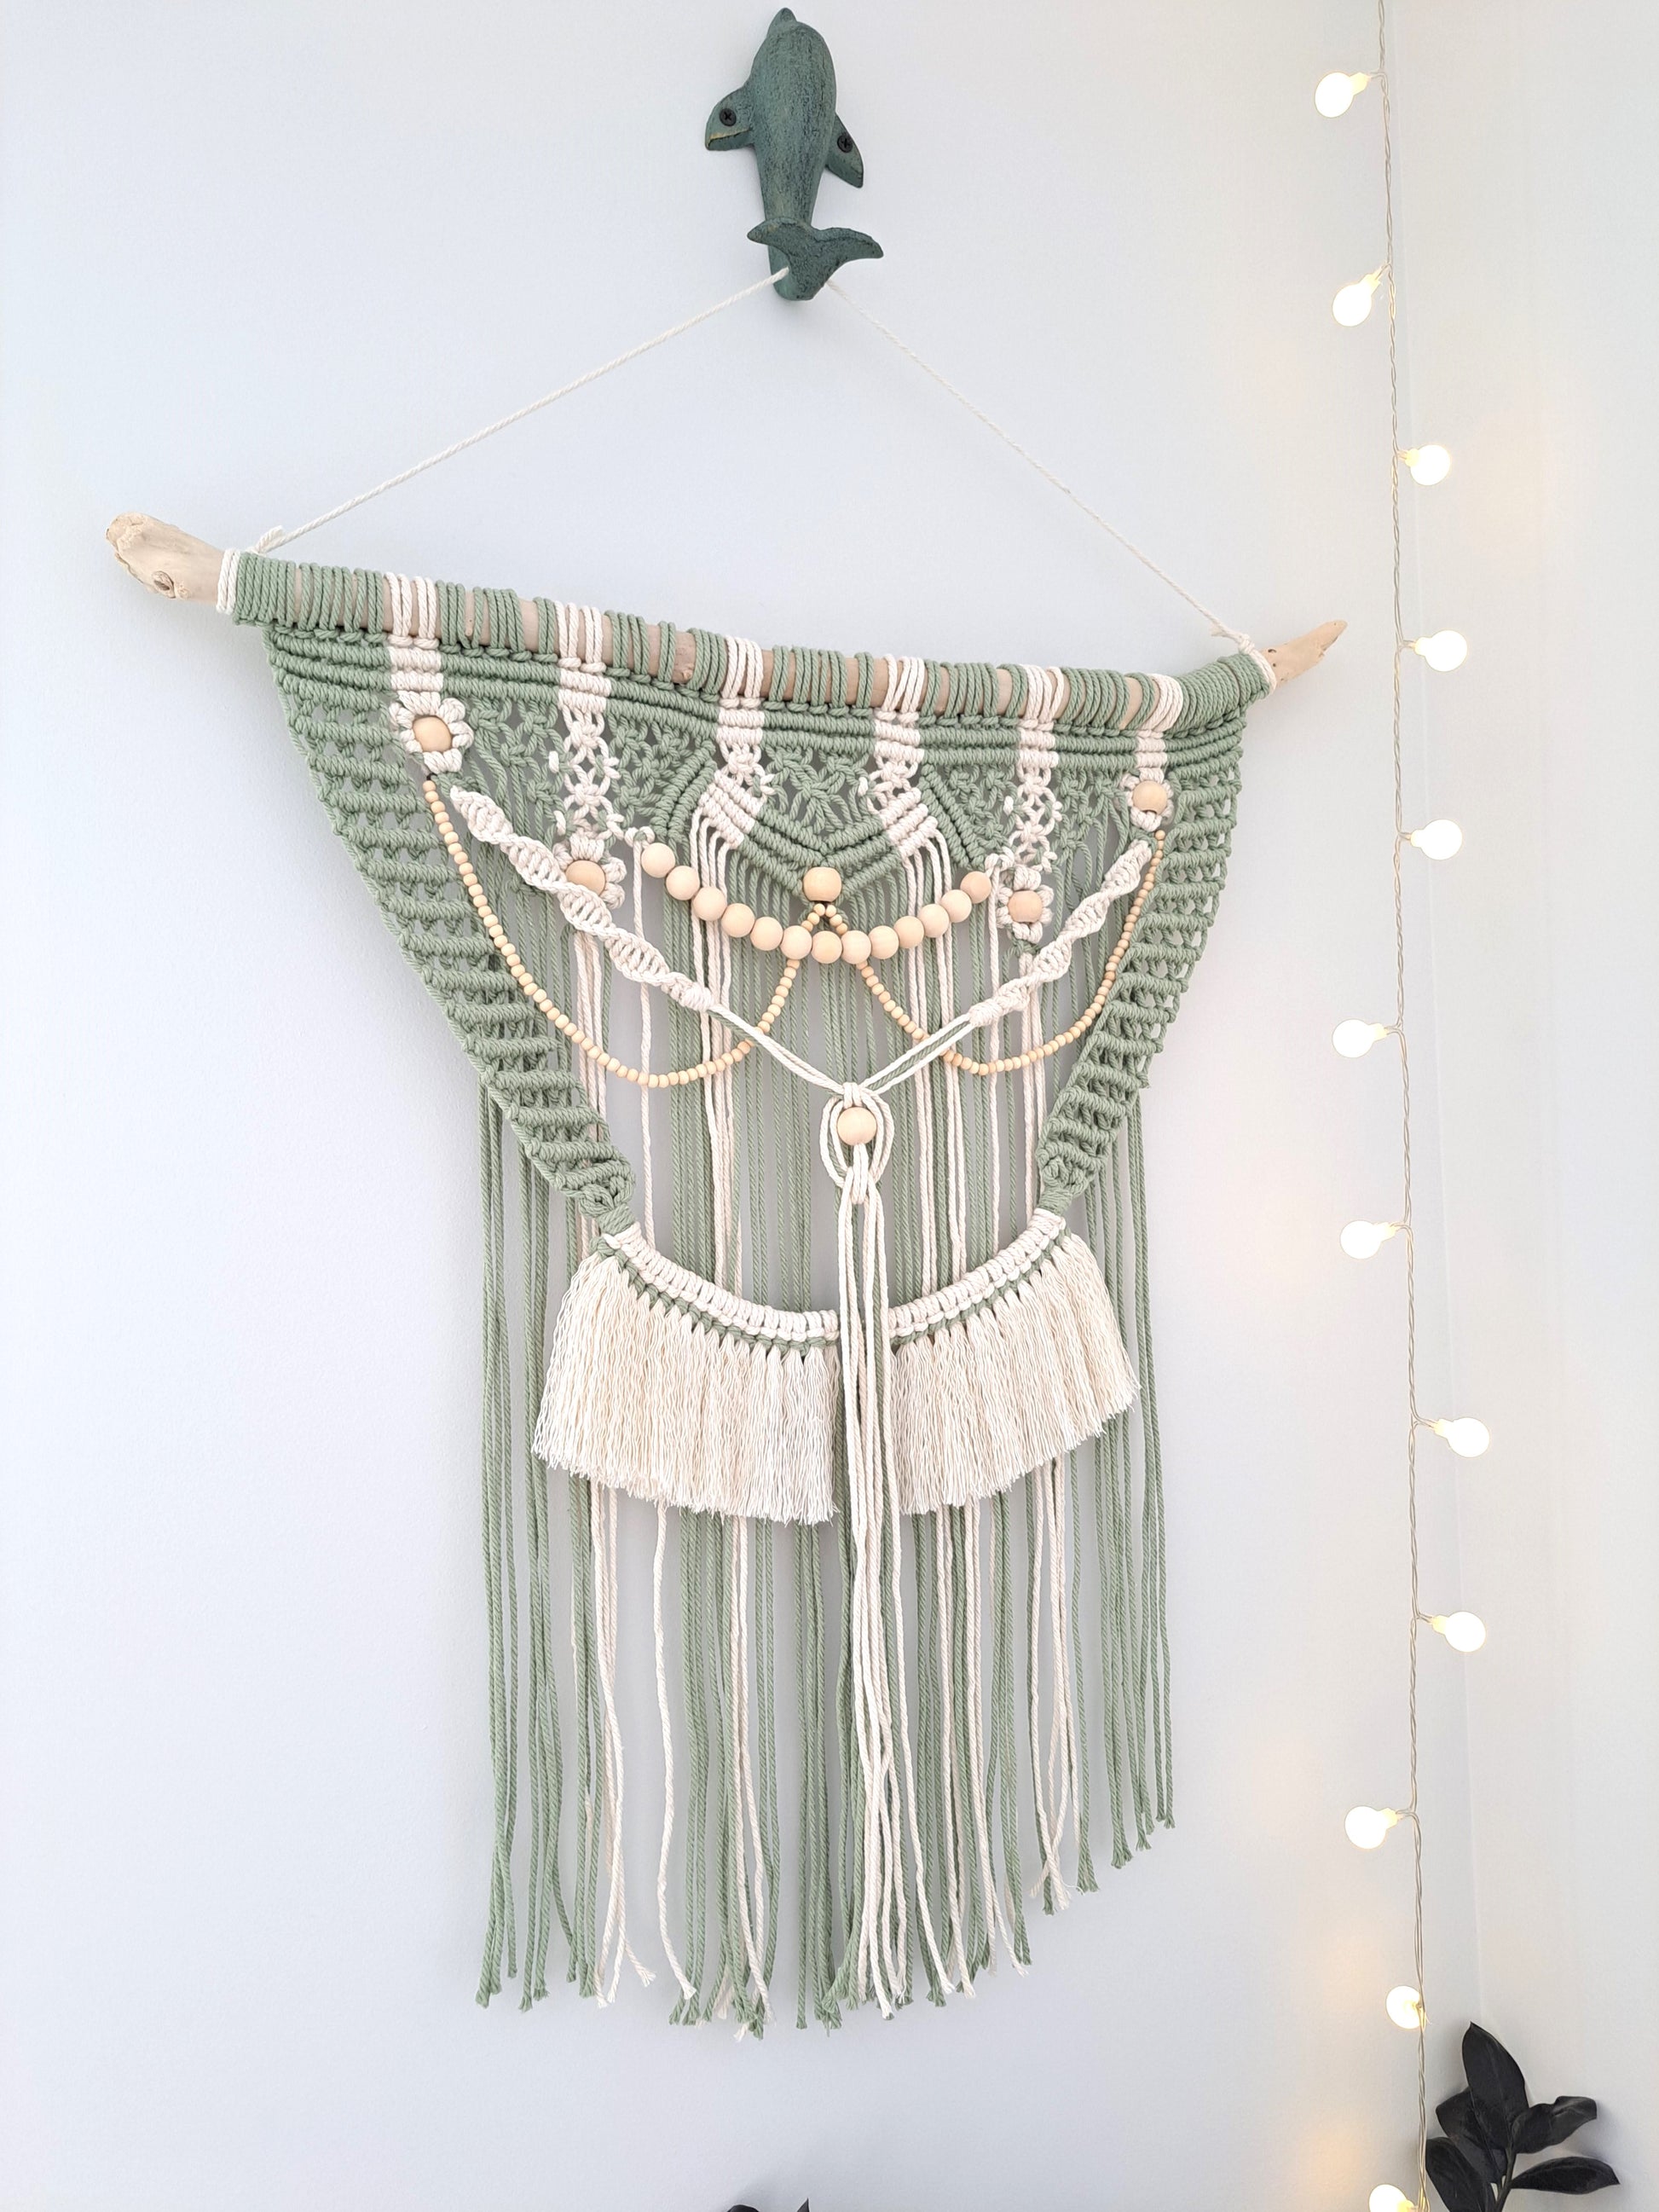 Weathered Landing's Boho Macrame Driftwood Wall Hanging. Handmade with sage green and white cotton macrame, wooden beads, and driftwood, this carefully crafted boho wall hanging is delicate and dainty. Perfect for a nursery or a bedroom nook. With lots of contrast in colour, texture, and pattern, this eclectic macrame wall hanging adds a bohemian feel to the space. Shipping to Canada and US.